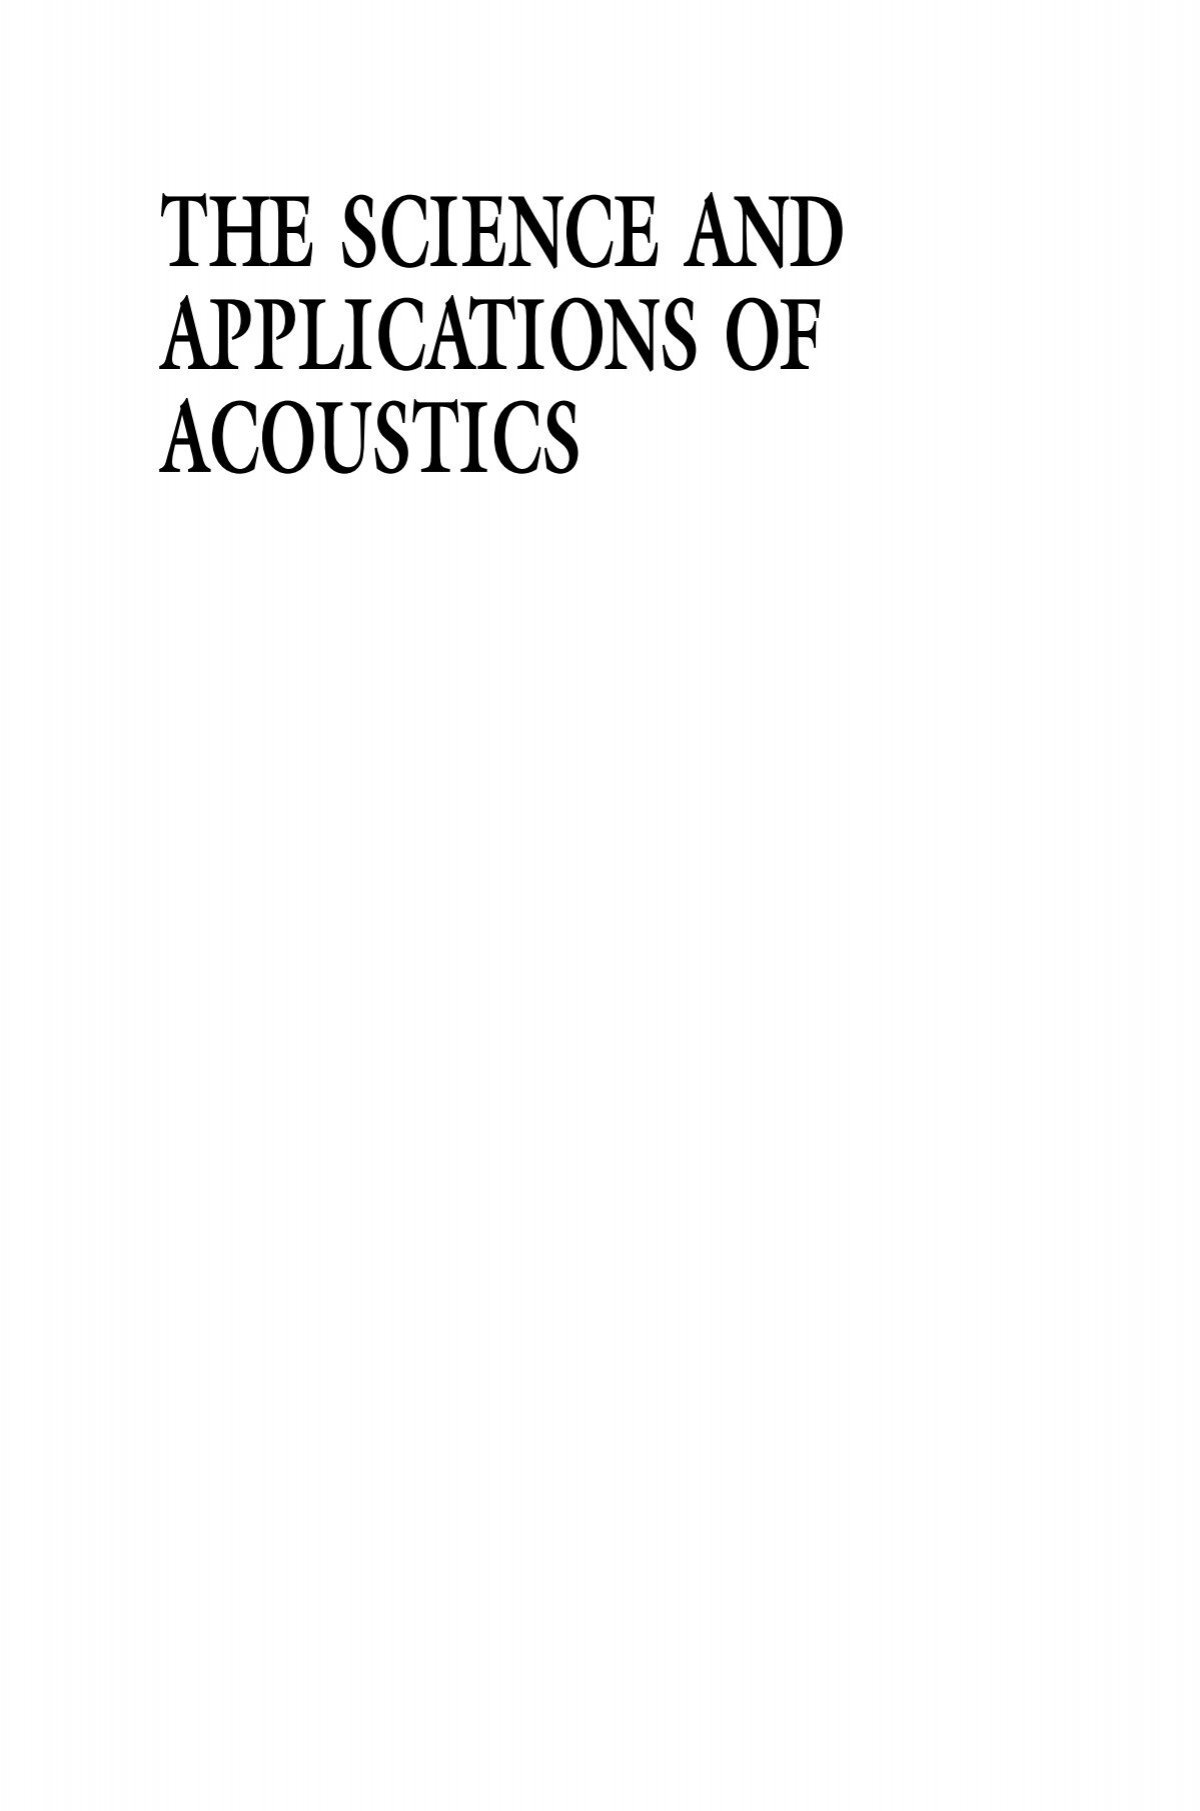 THE SCIENCE AND APPLICATIONS OF ACOUSTICS - H. H. Arnold